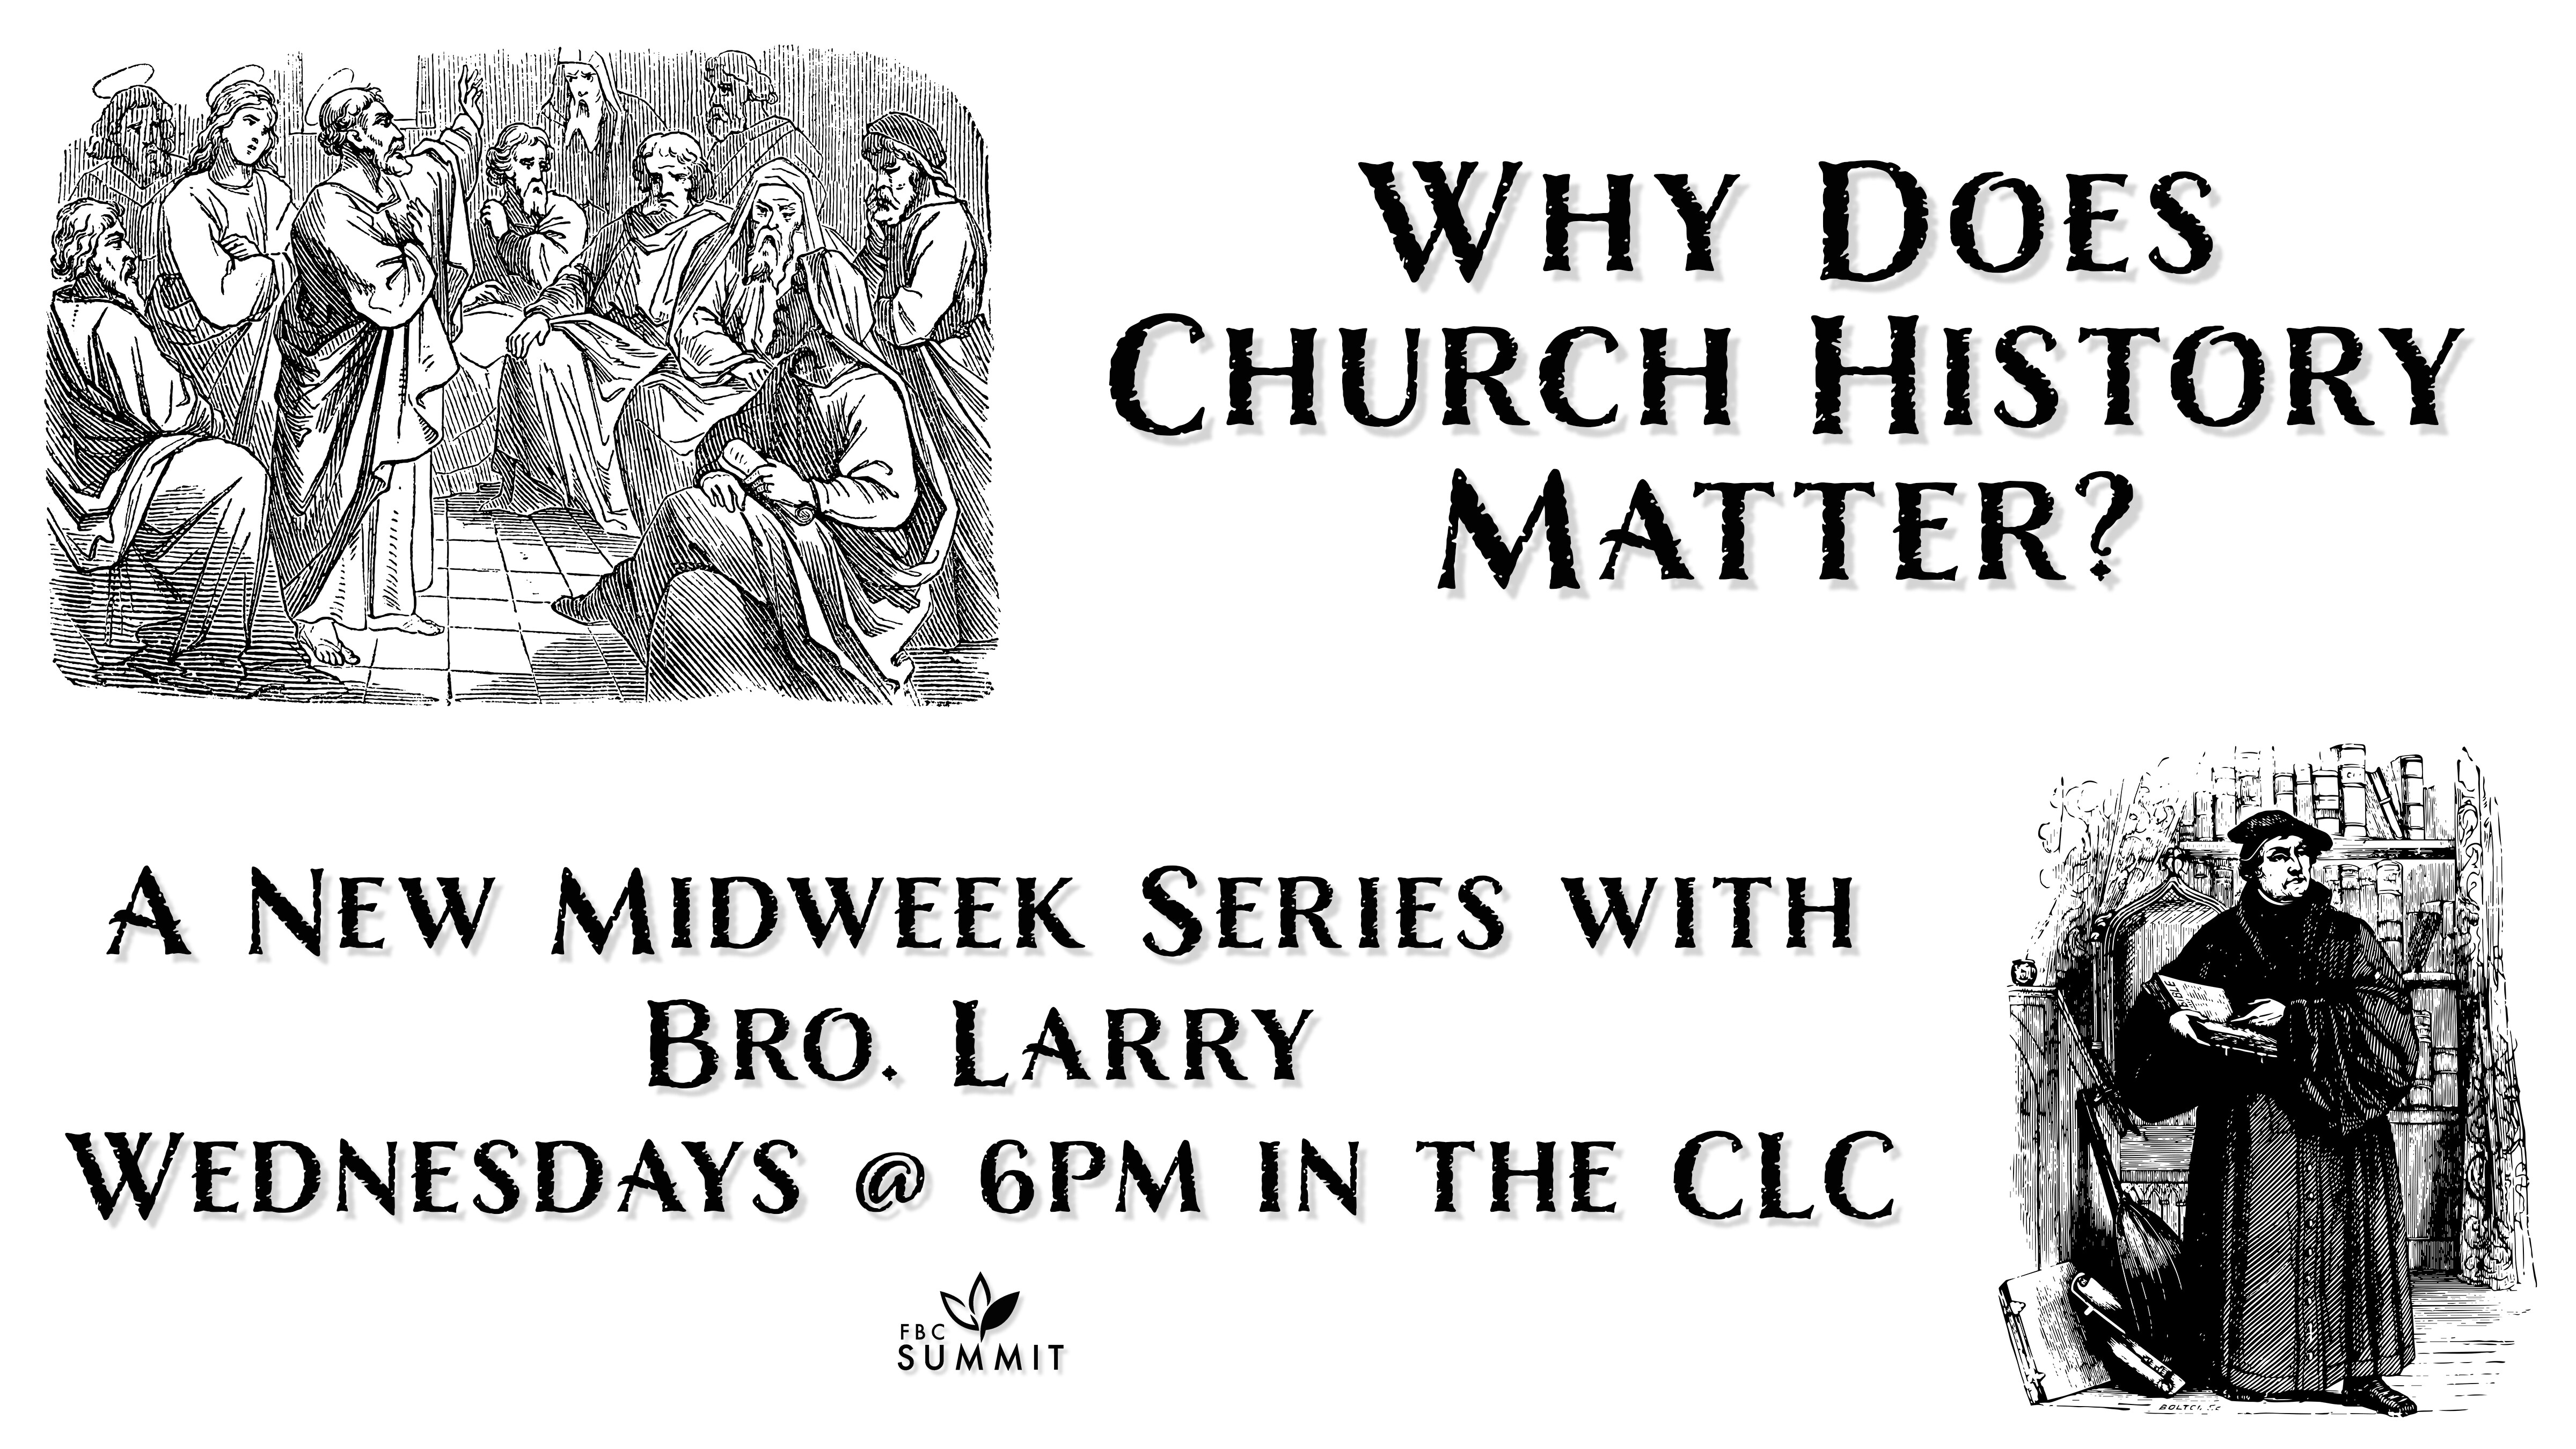 Midweek Bible Study: "Church History 101: The 19th and 20th Centuries" // Larry LeBlanc